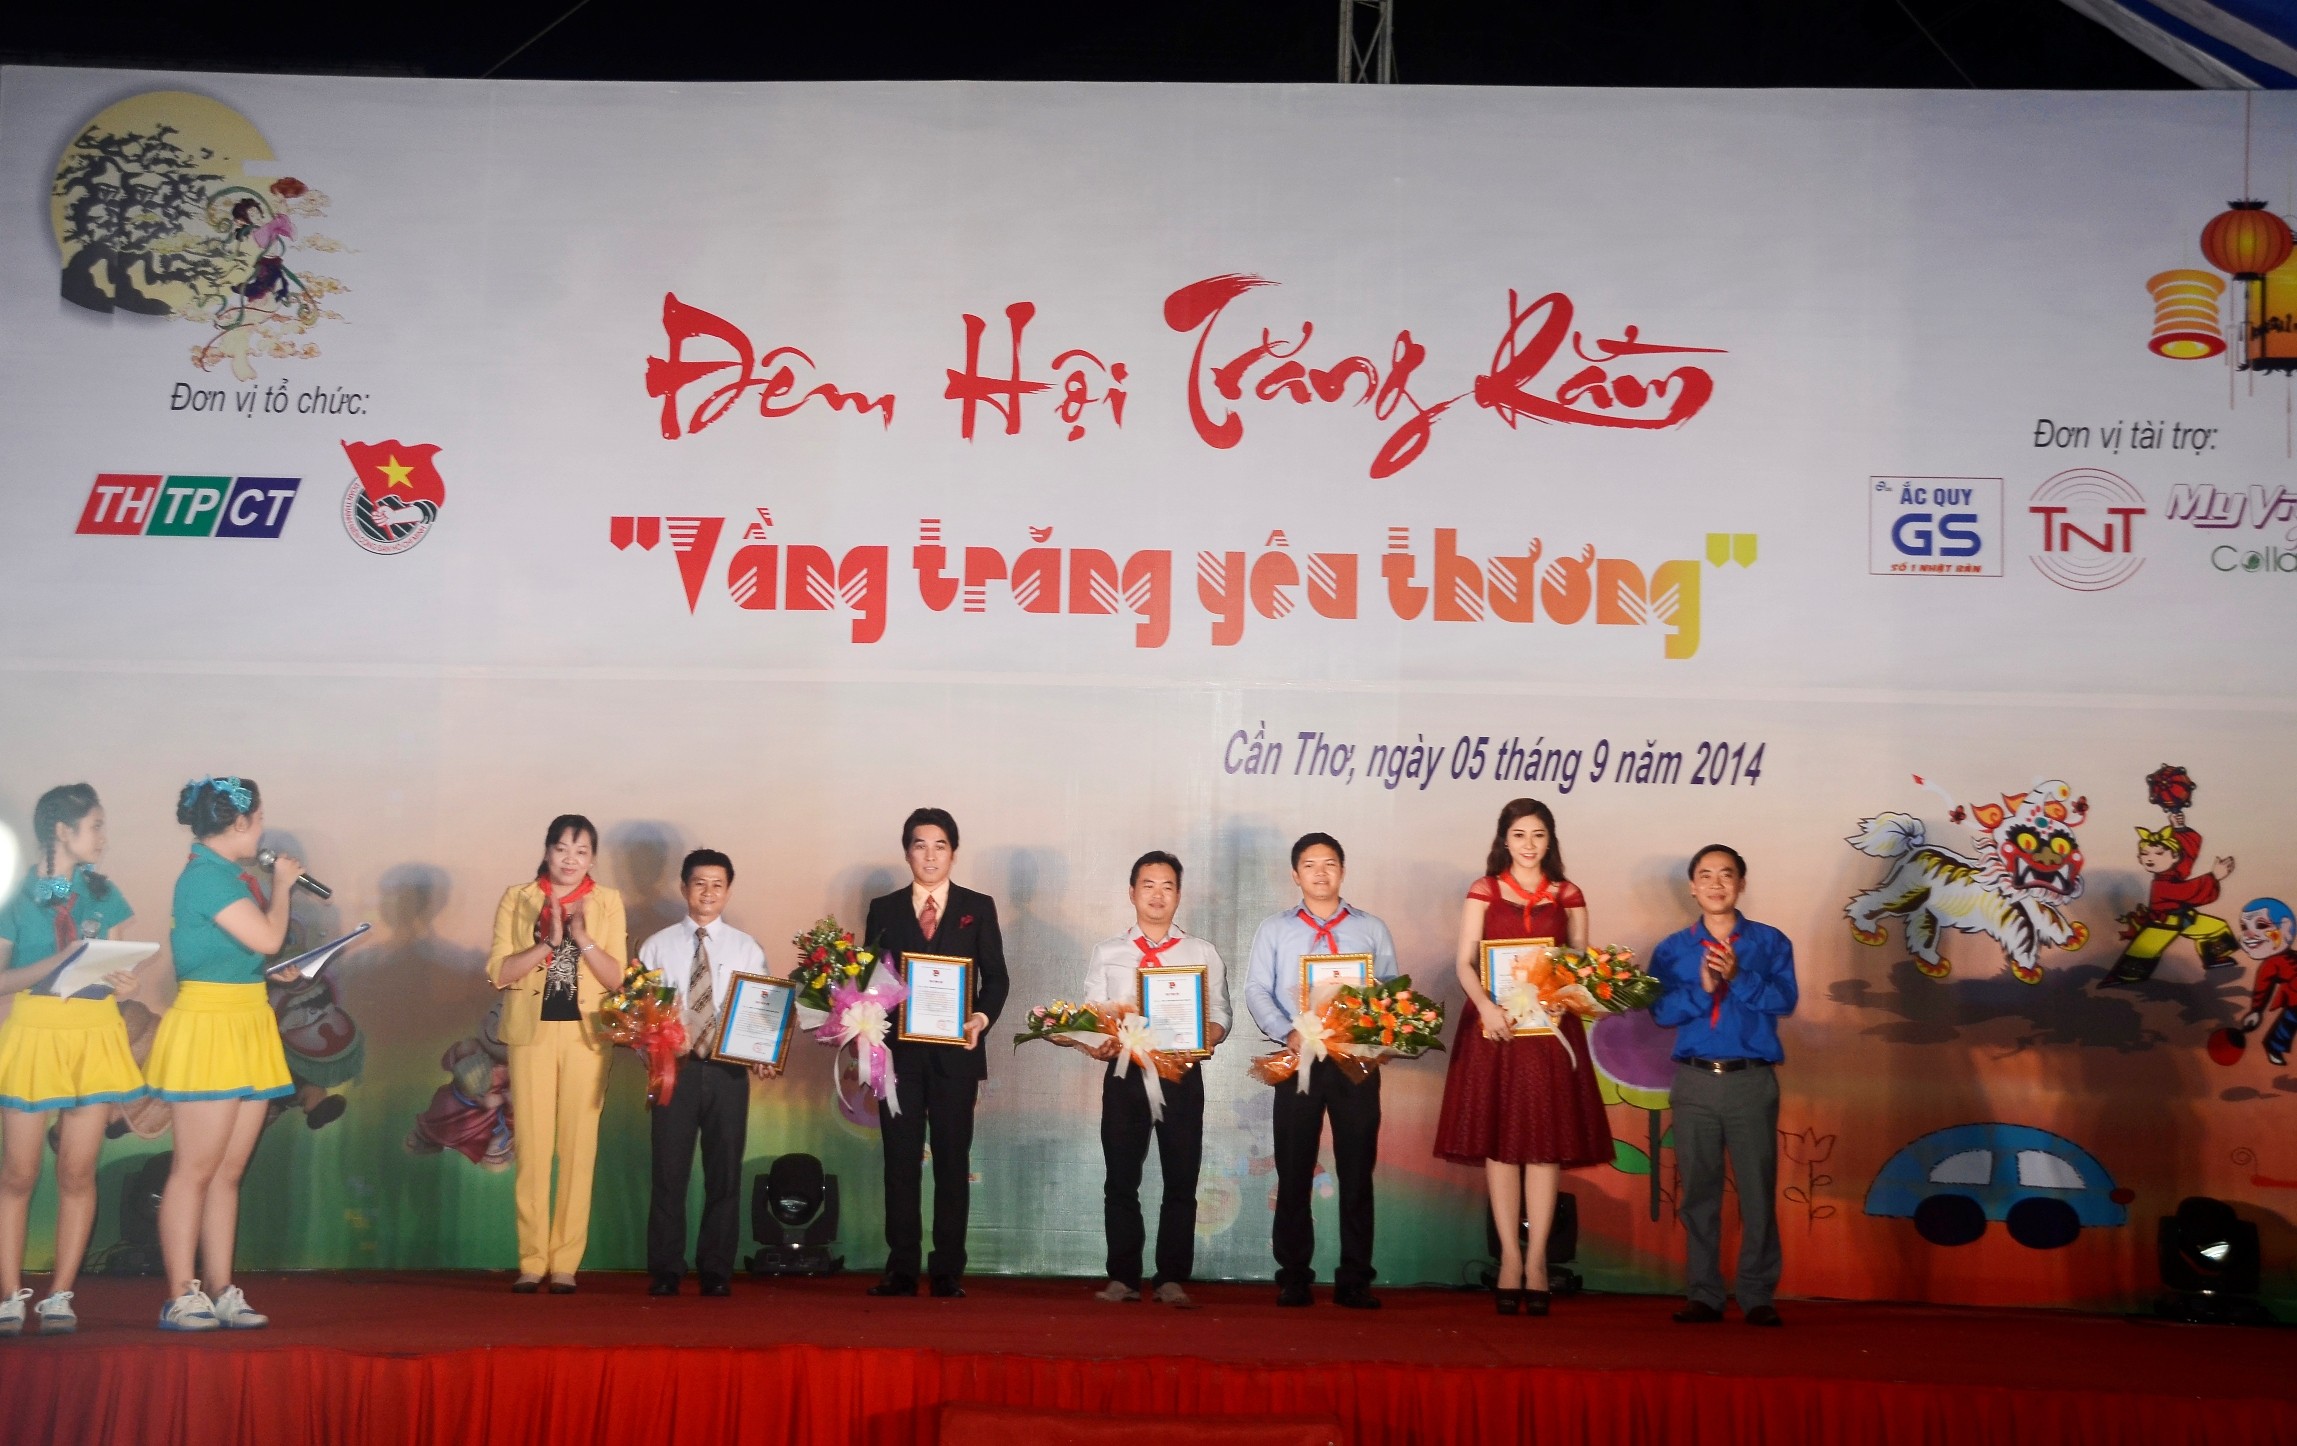 GS BATTERY VIETNAM - BRINGING MID AUTUMN FESTIVAL TO THE CHILDREN IN CAN THO CITY